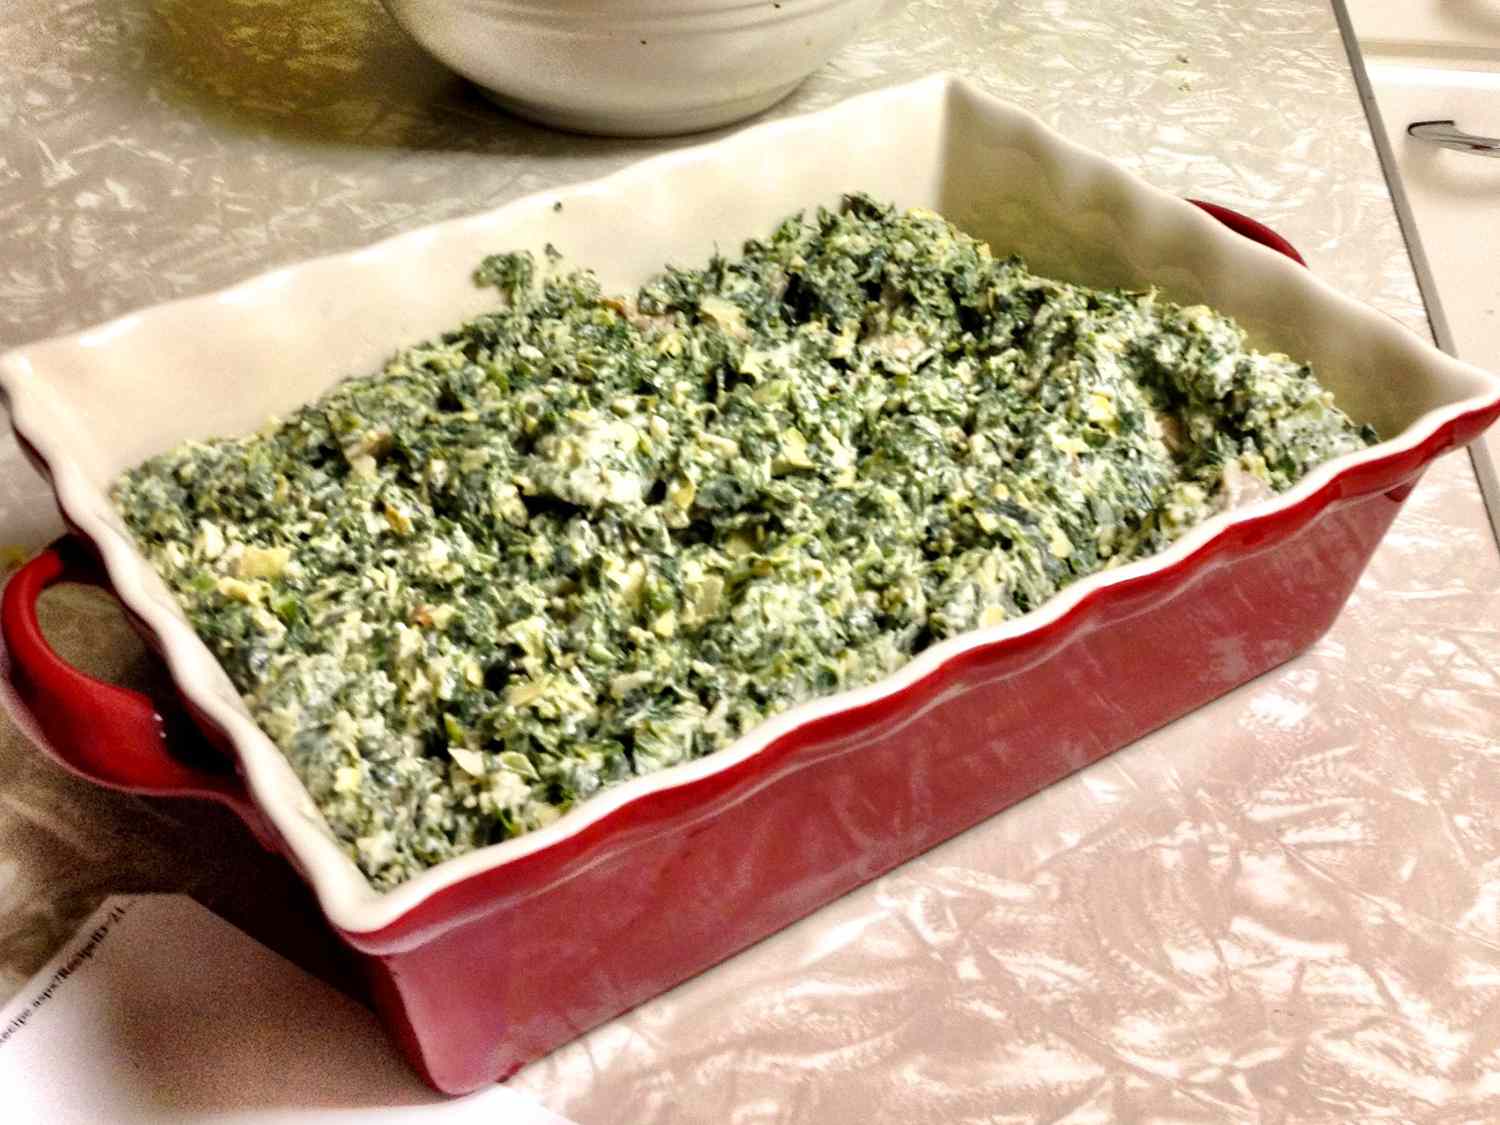 close up view of Spinach Artichoke Casserole in a red and white baking dish